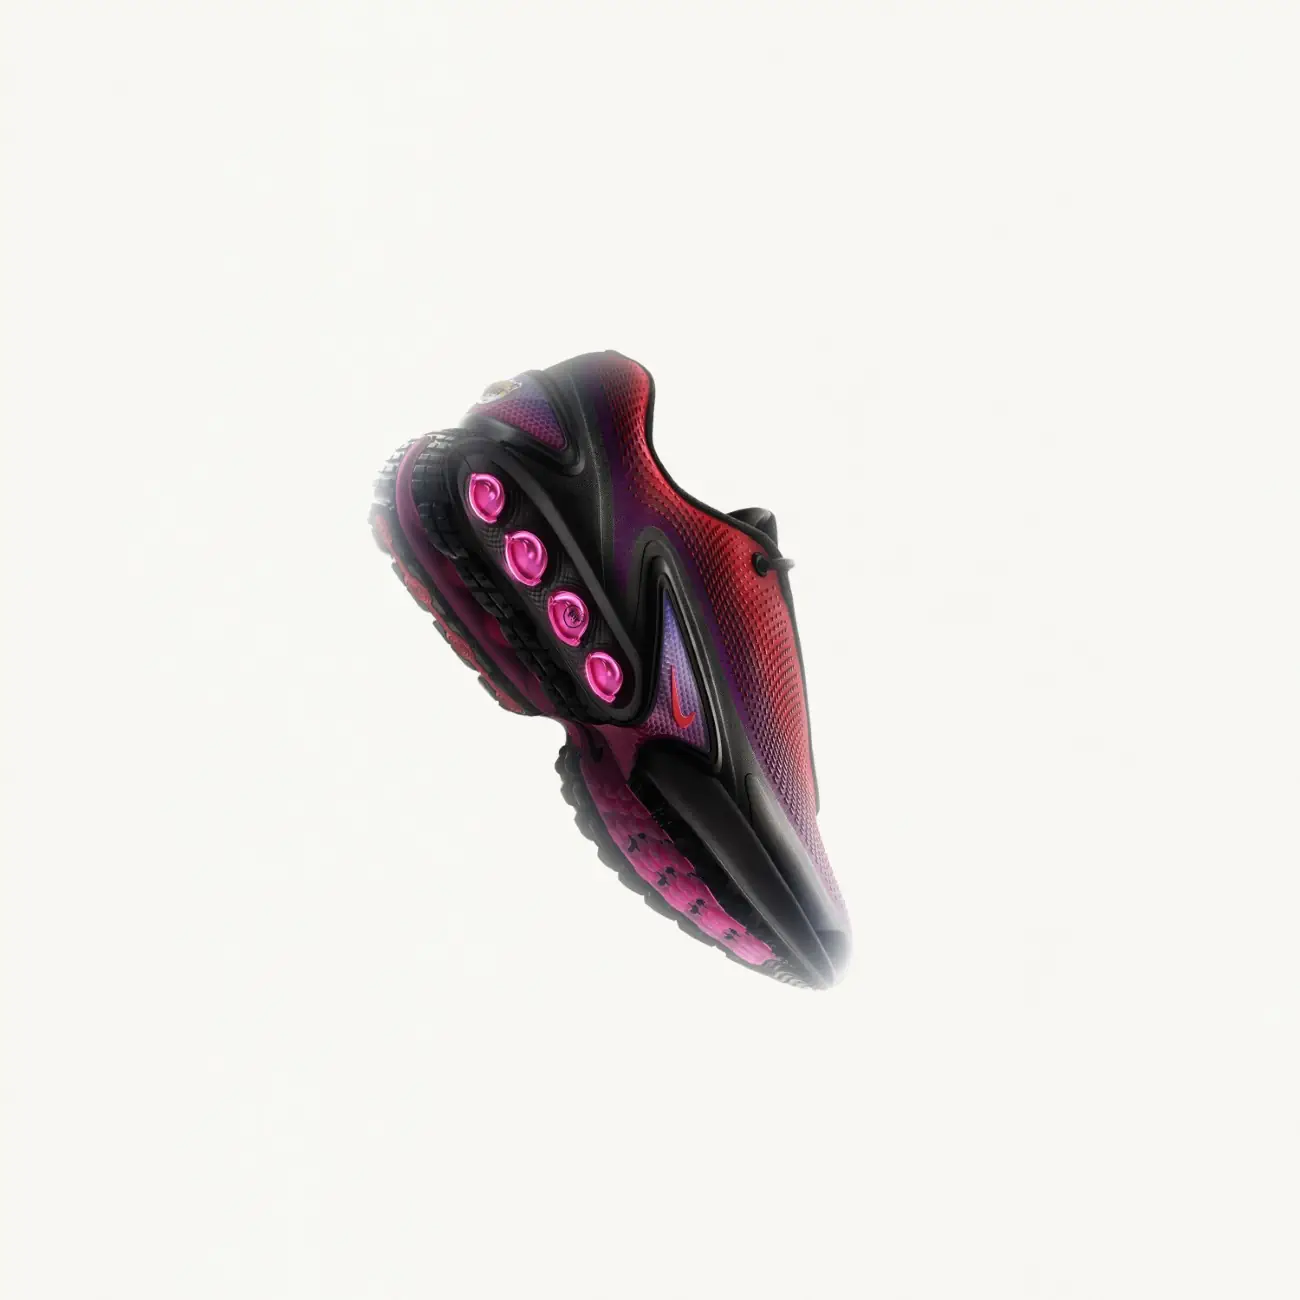 Nike Air Max Dn heralds a new generation of Air